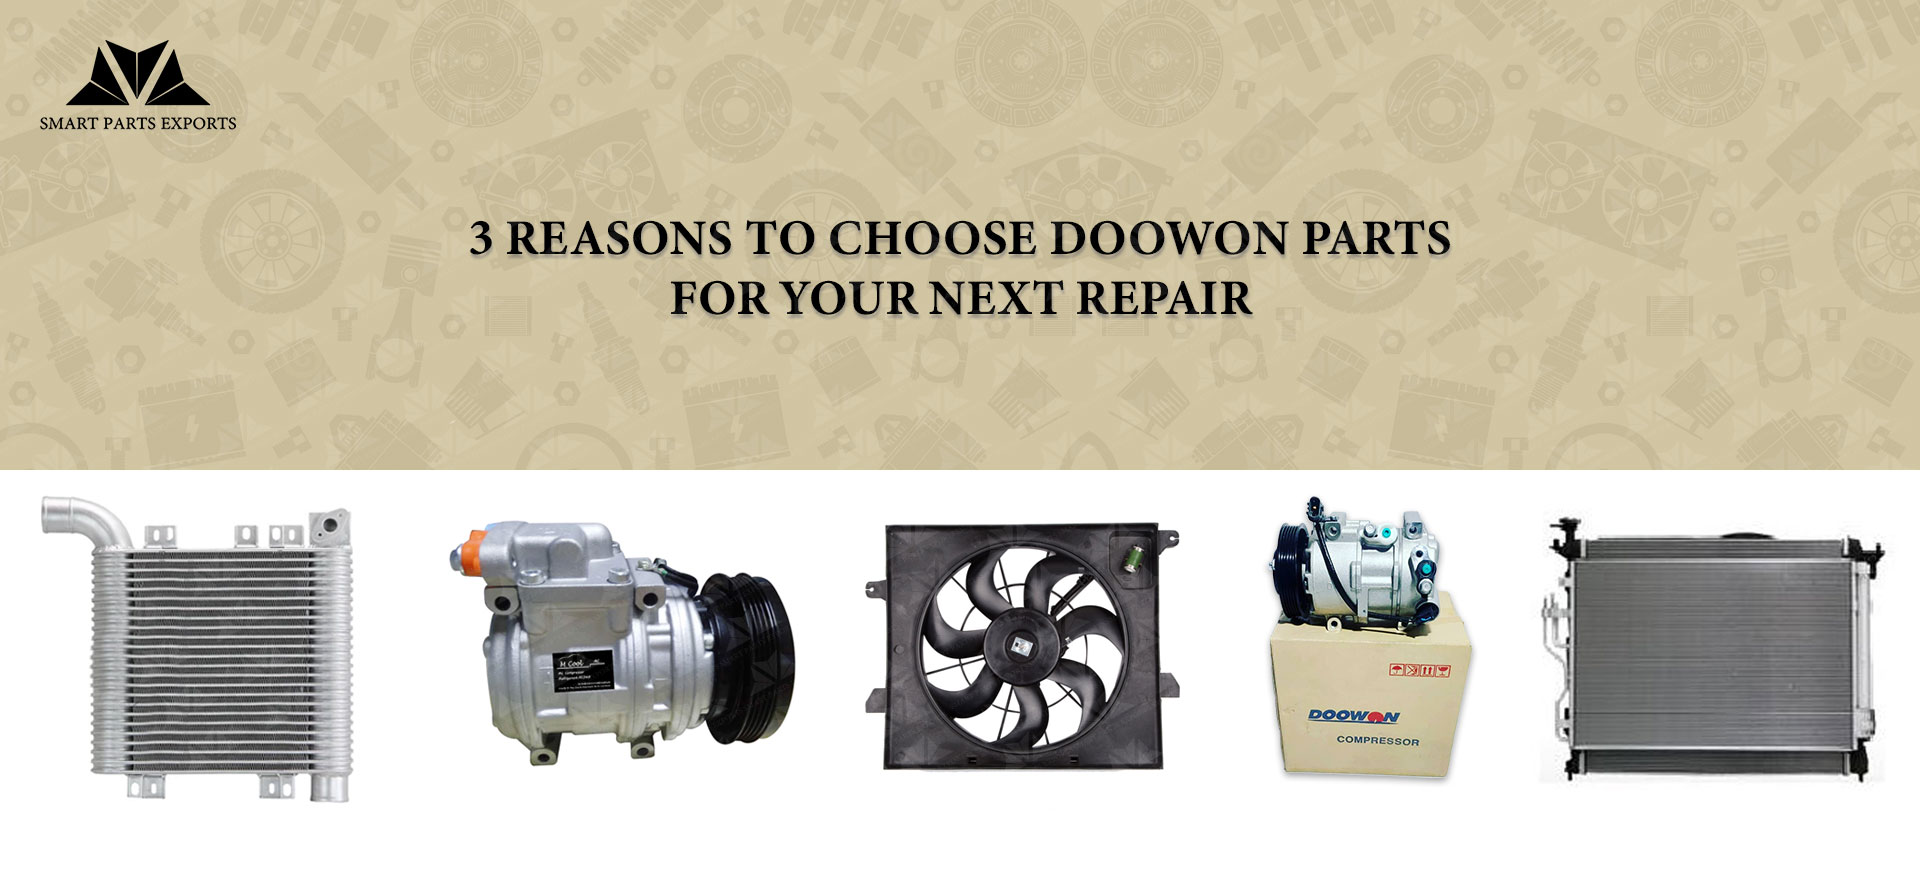 3 Reasons to Choose Doowon Parts for Your Next Repair